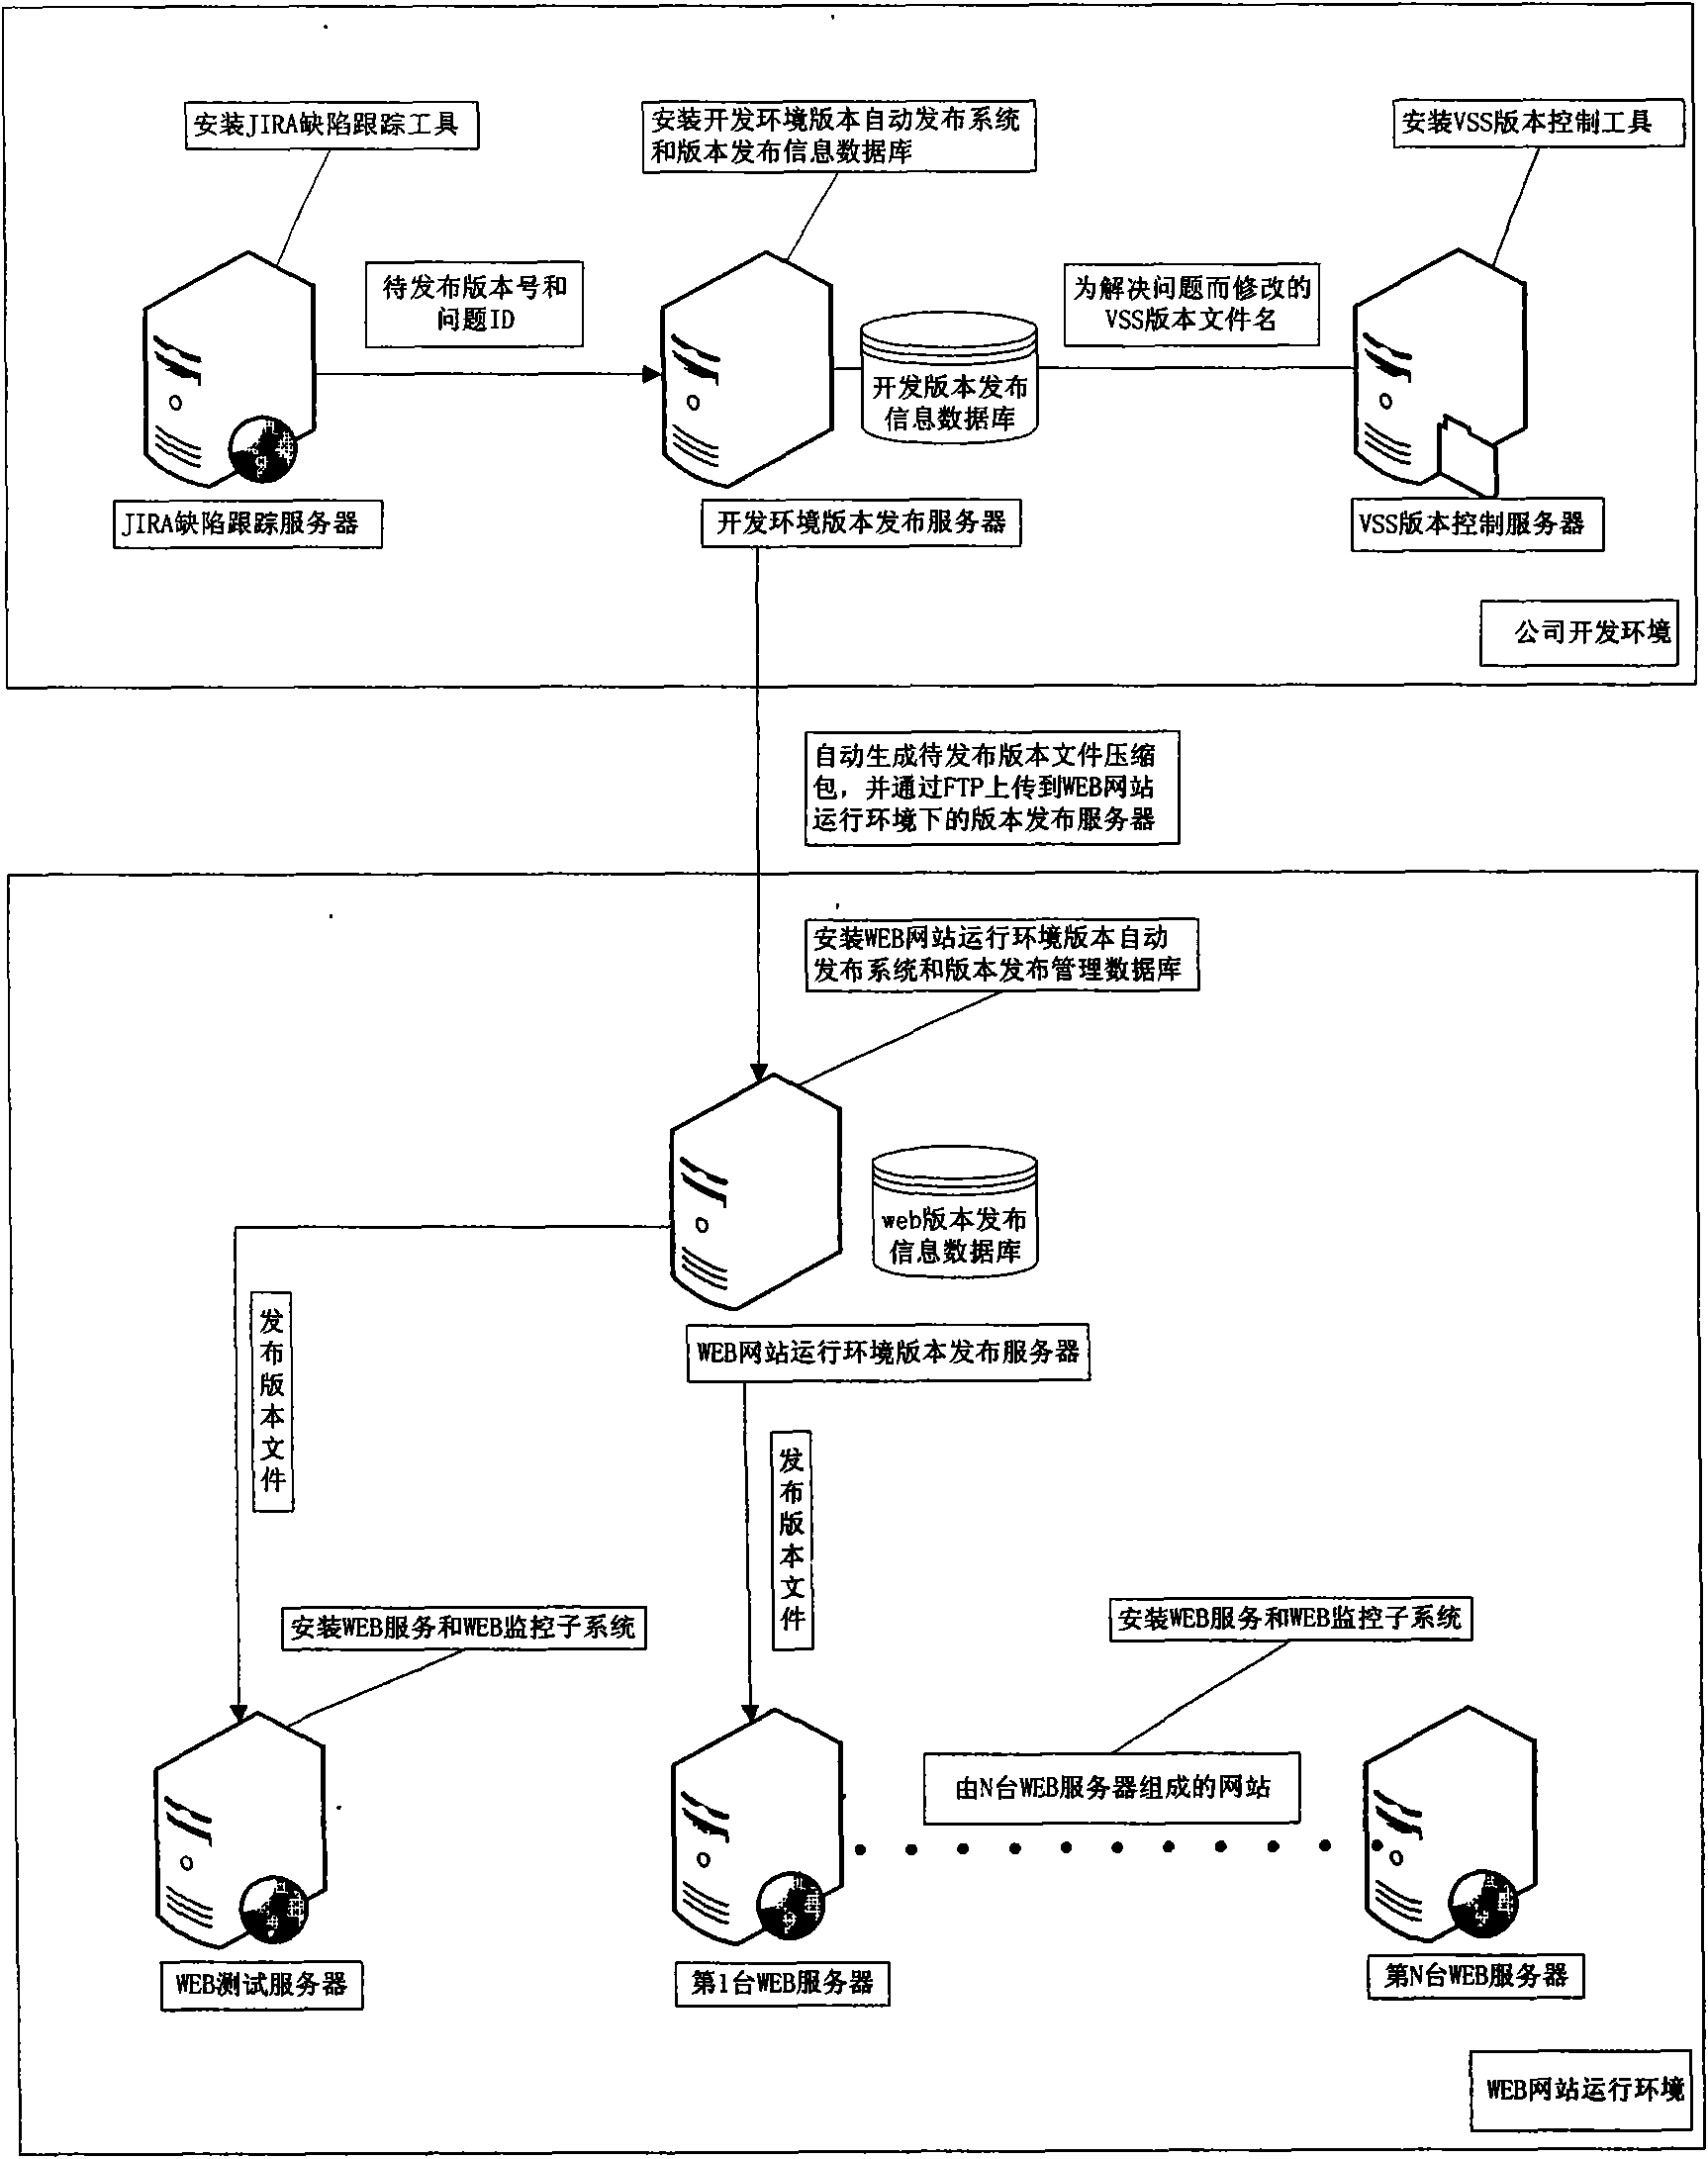 Method for automatically releasing terminal program version of WEB network station system server